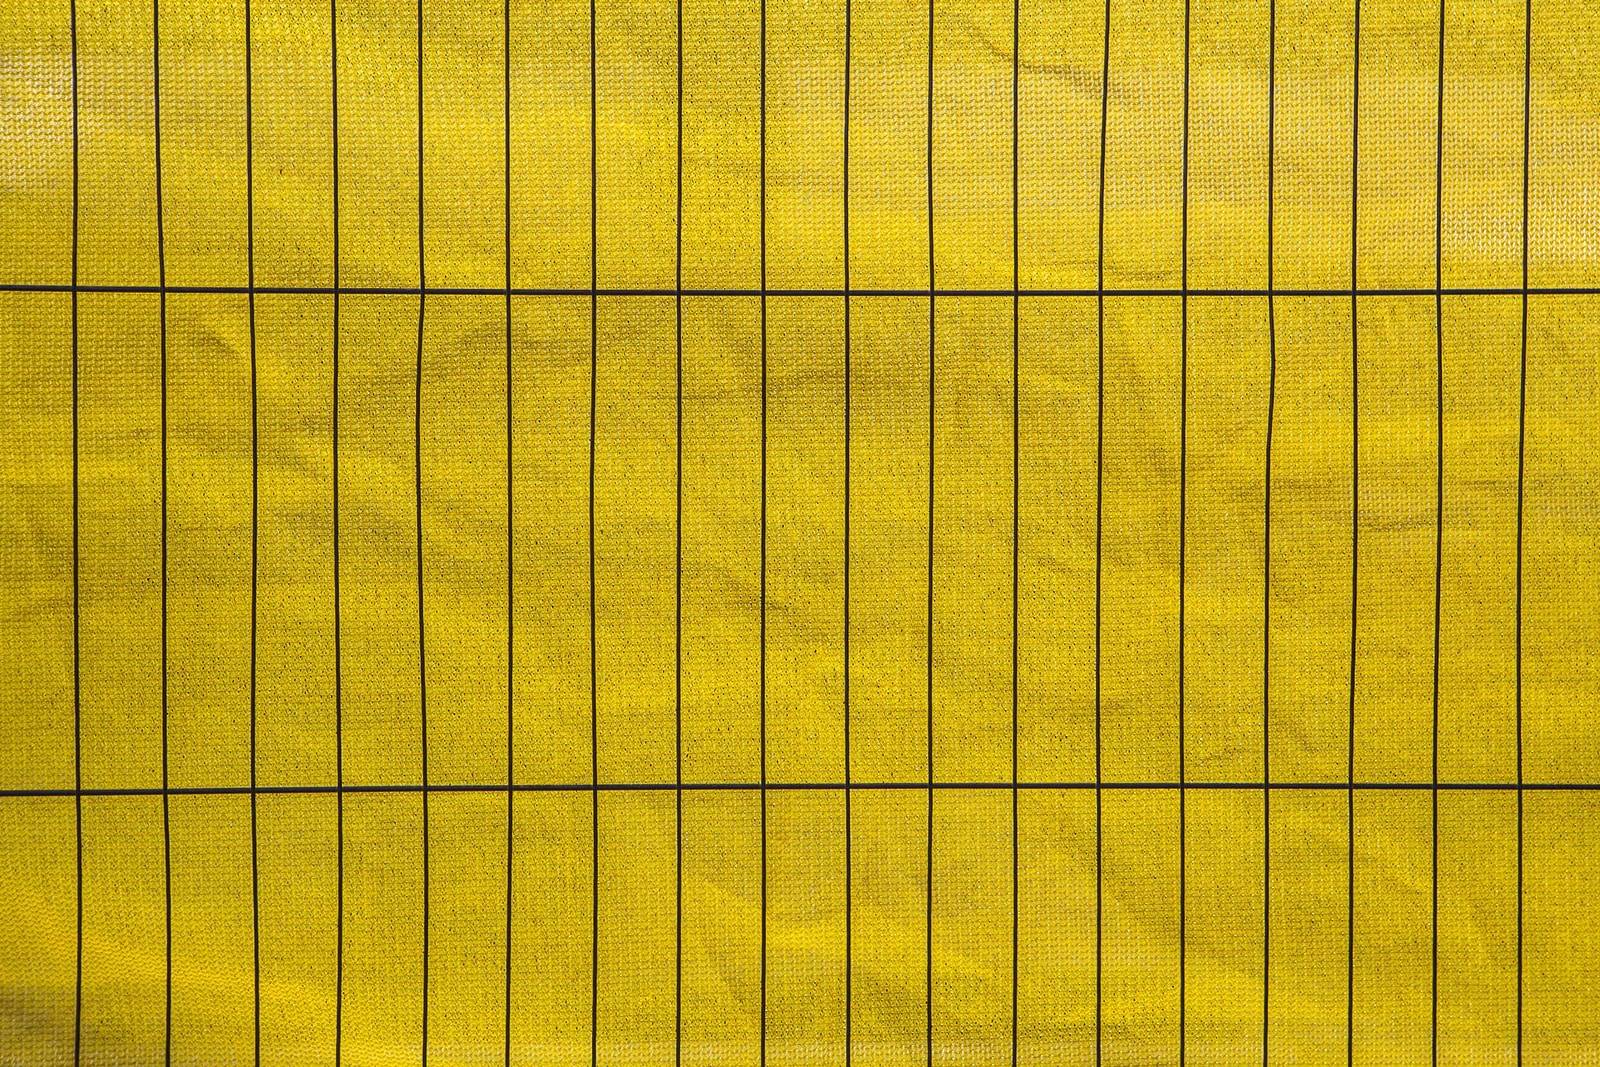 yellow and black ruled paper